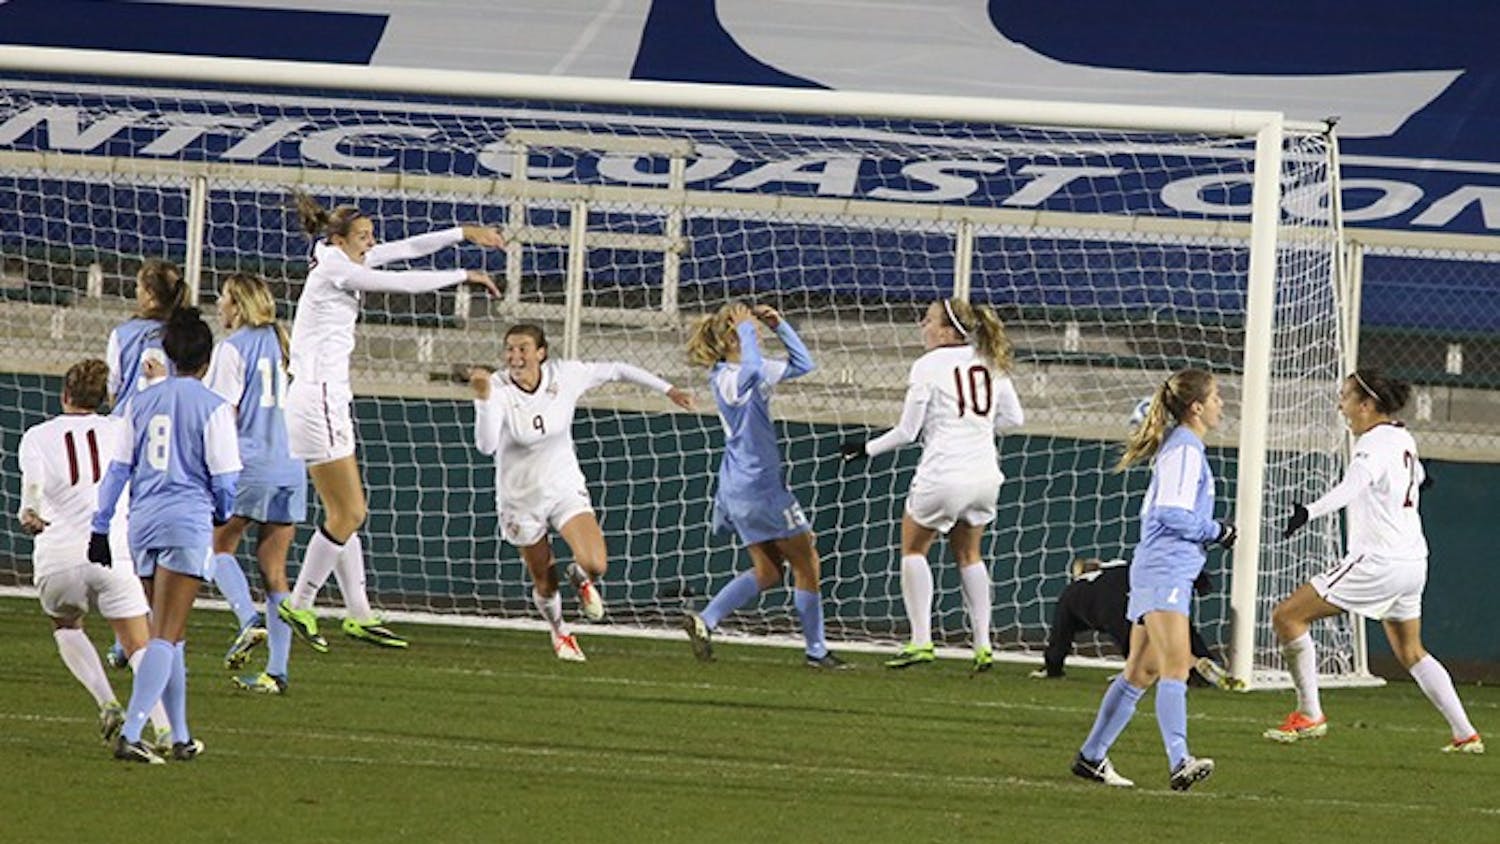 The UNC women's soccer team lost in the ACC tournament to Florida State 2-1 in overtime at WakeMed Soccer Park in Cary on Nov.8.